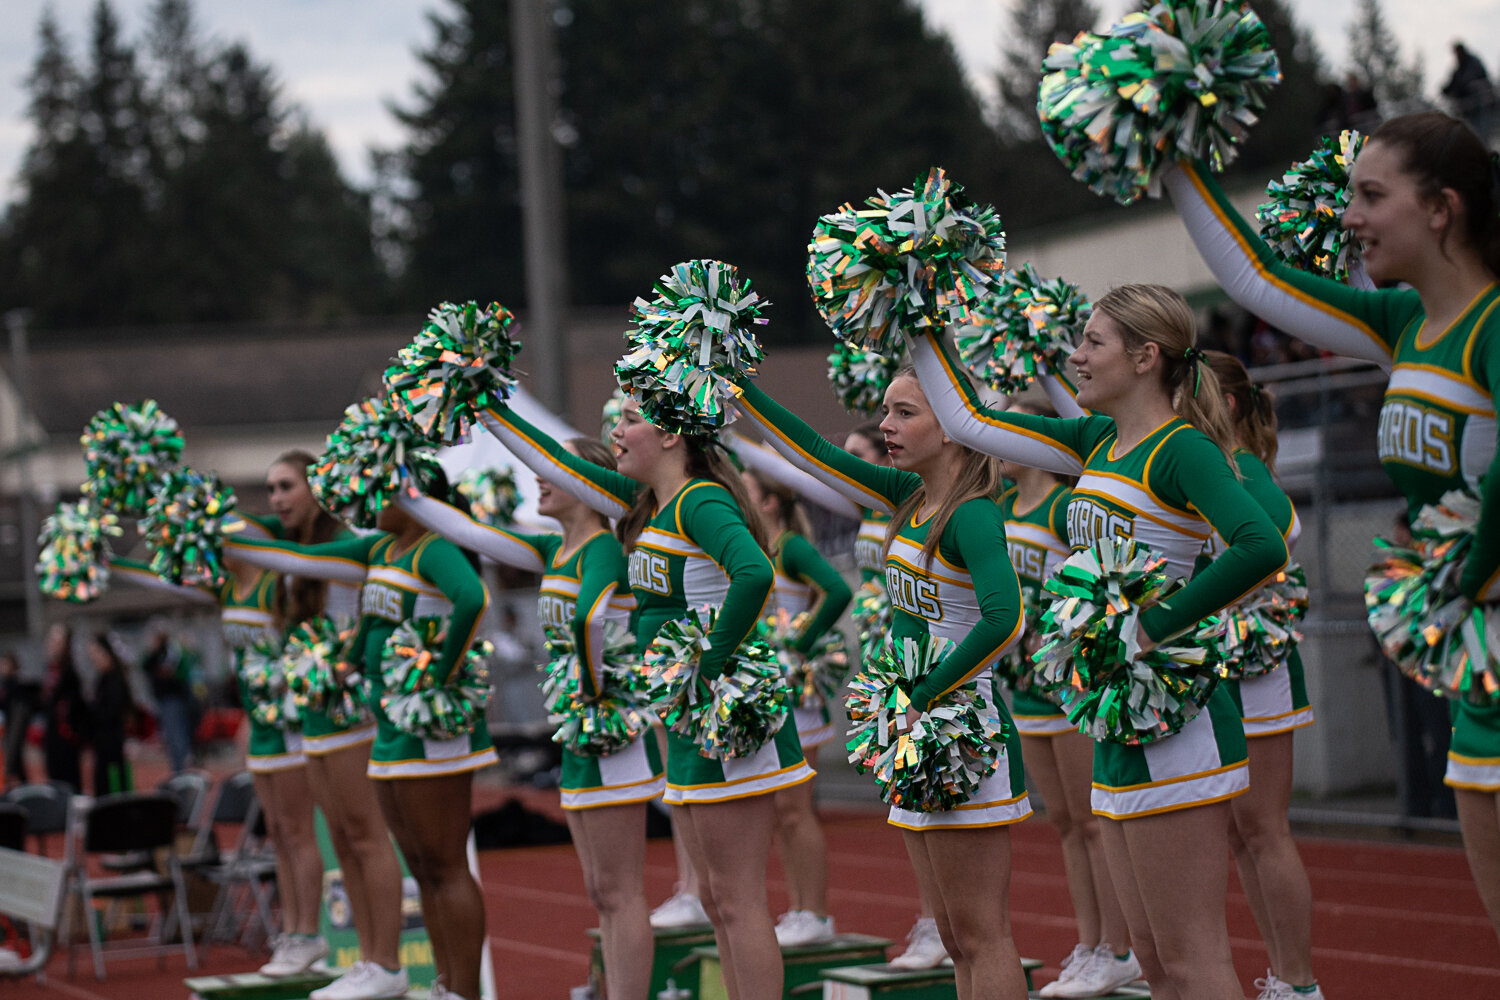 The Tumwater cheerleaders perform a routine during Tumwater's 42-6 win over Clarkston in the 2A quarterfinals in Tumwater on Nov. 18.